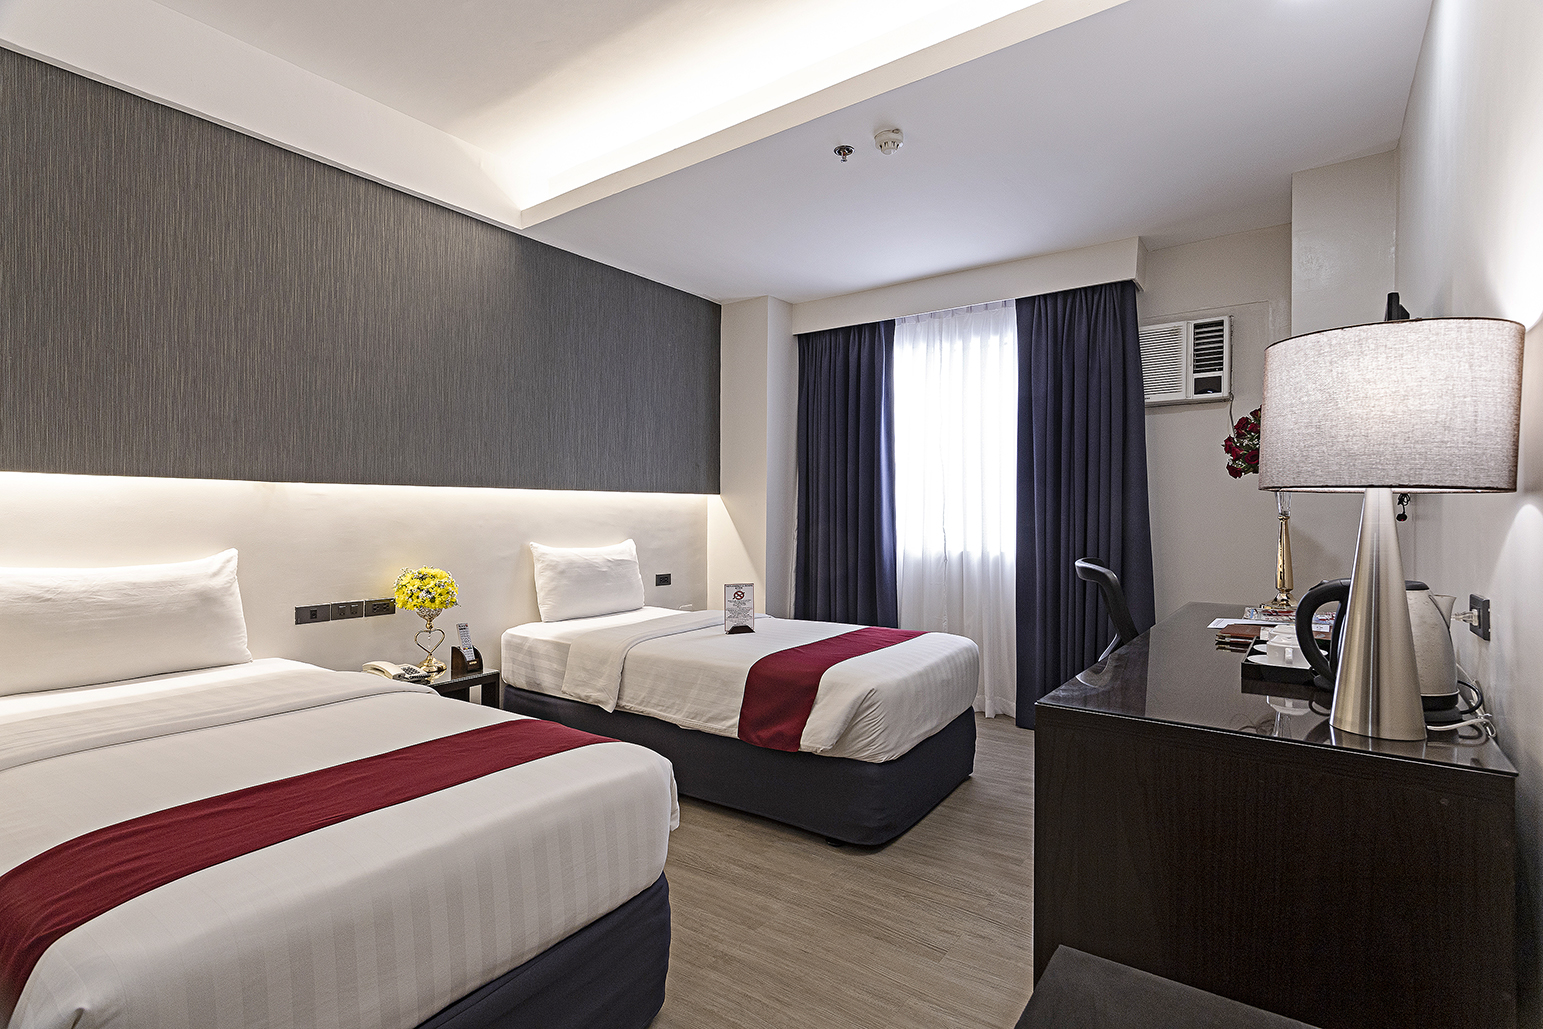 SARROSA INTERNATIONAL HOTEL AND RESIDENTIAL SUITES PROMO B: WITH AIRFARE PROMO cebu Packages